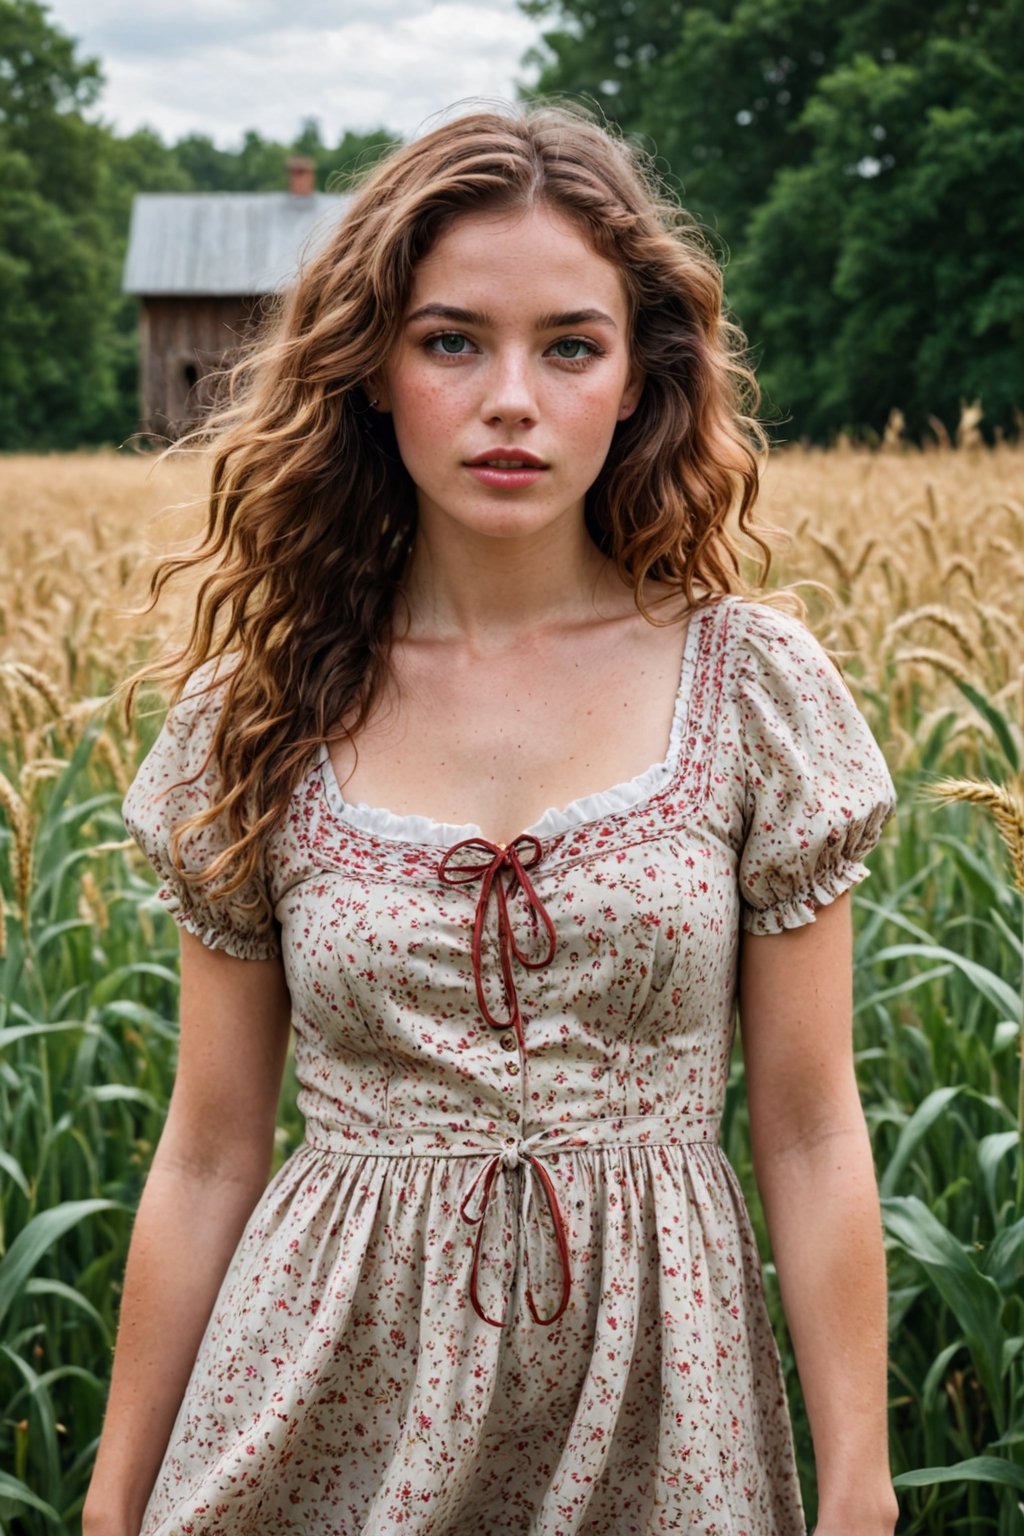 Rural Charm A woman whose beauty is rustic and charming, like a country maiden in a pastoral setting. Her features are wholesome and down-to-earth, with a rosy glow to her cheeks and a twinkle in her eye. Her skin is sun-kissed and freckled, with a natural, outdoorsy charm. Her hair is a mane of wild curls, the color of ripe wheat. She wears a simple, cotton dress, the fabric adorned with floral patterns that echo the beauty of the countryside. She radiates a sense of warmth and hospitality, like a breath of fresh air in a busy world.
